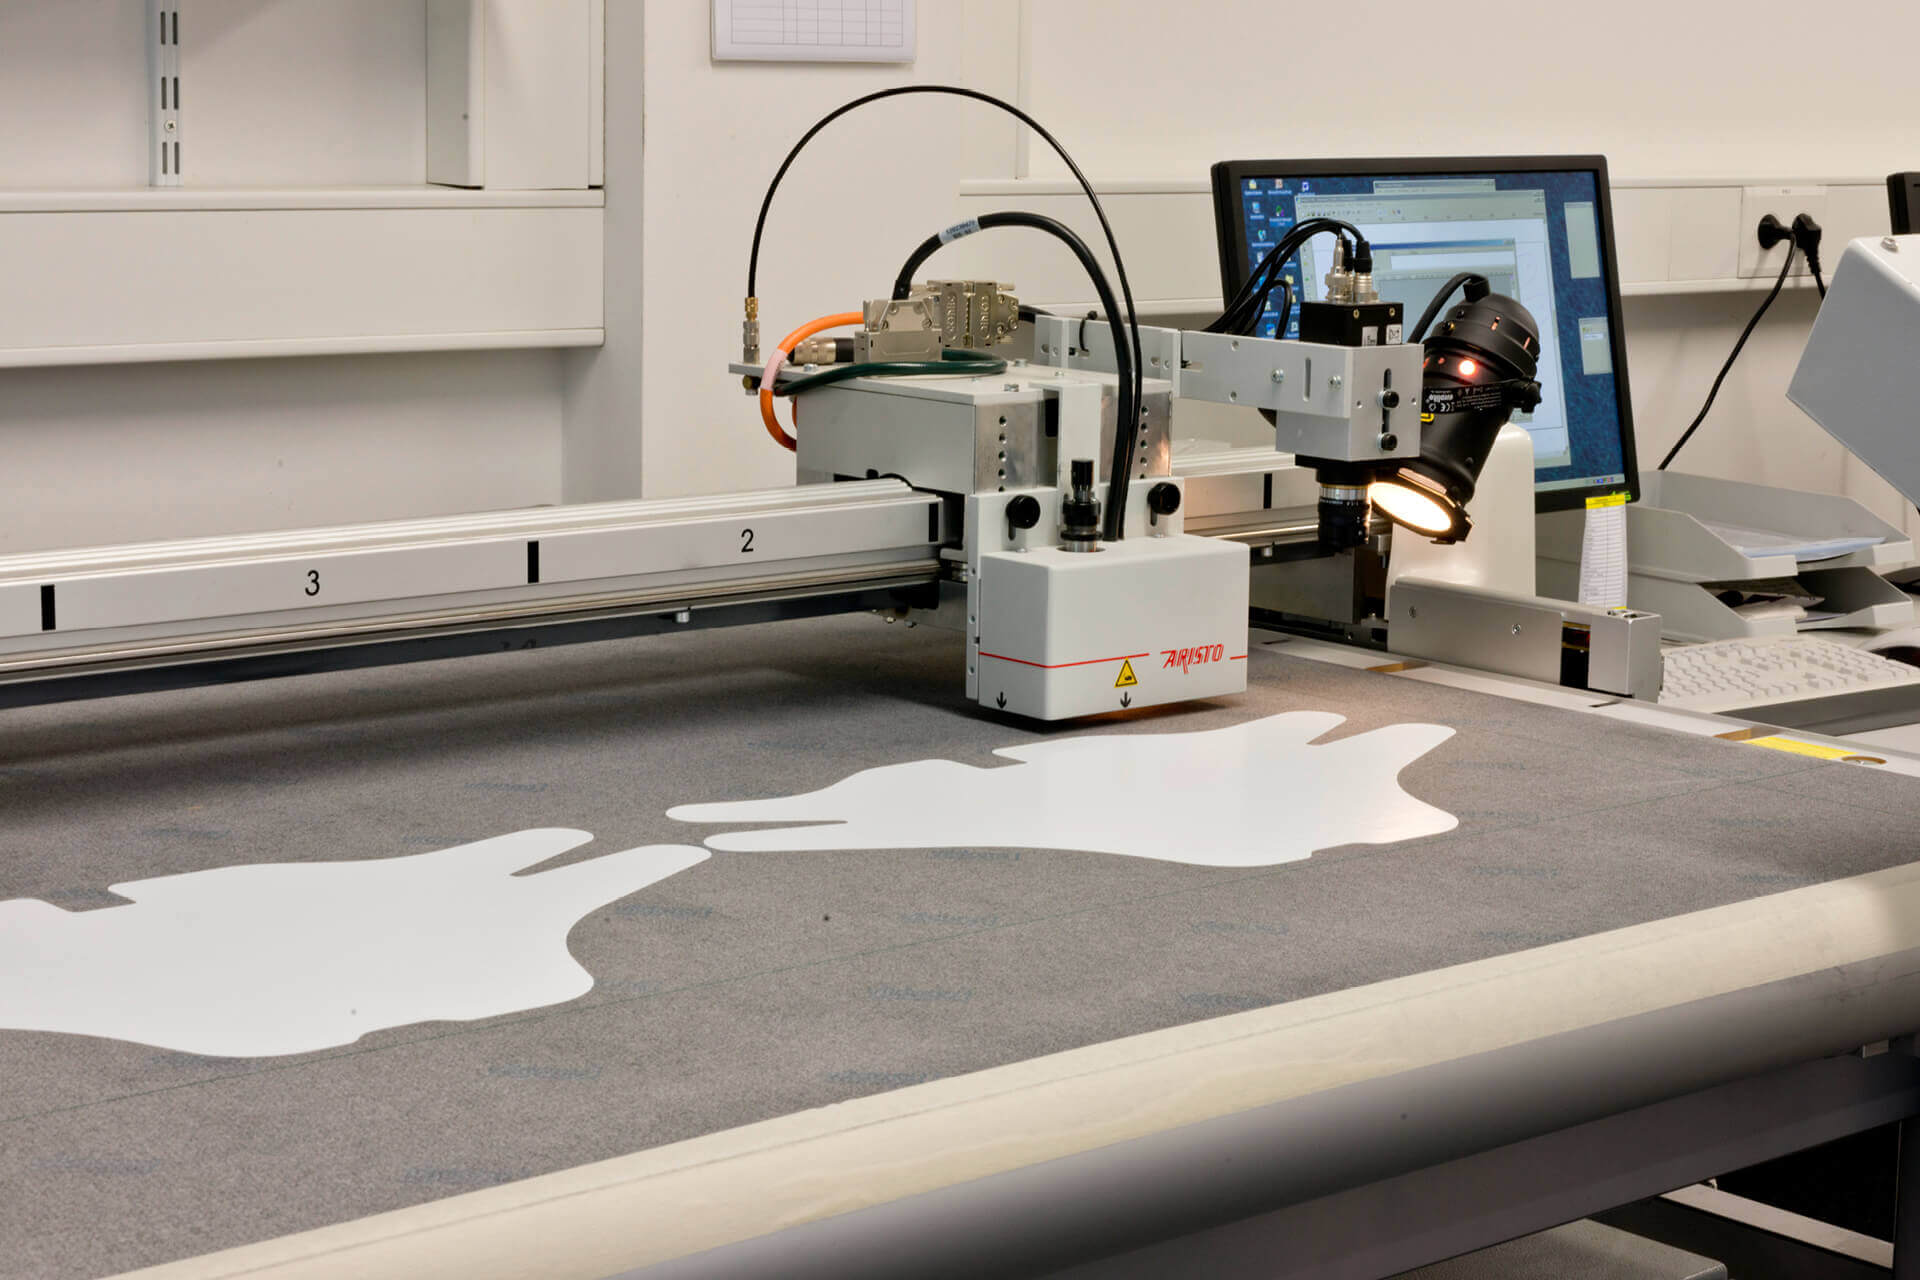 A computer-controlled cutting plotter enables precision cutting of plastic films, papers, fleece, or foam materials.